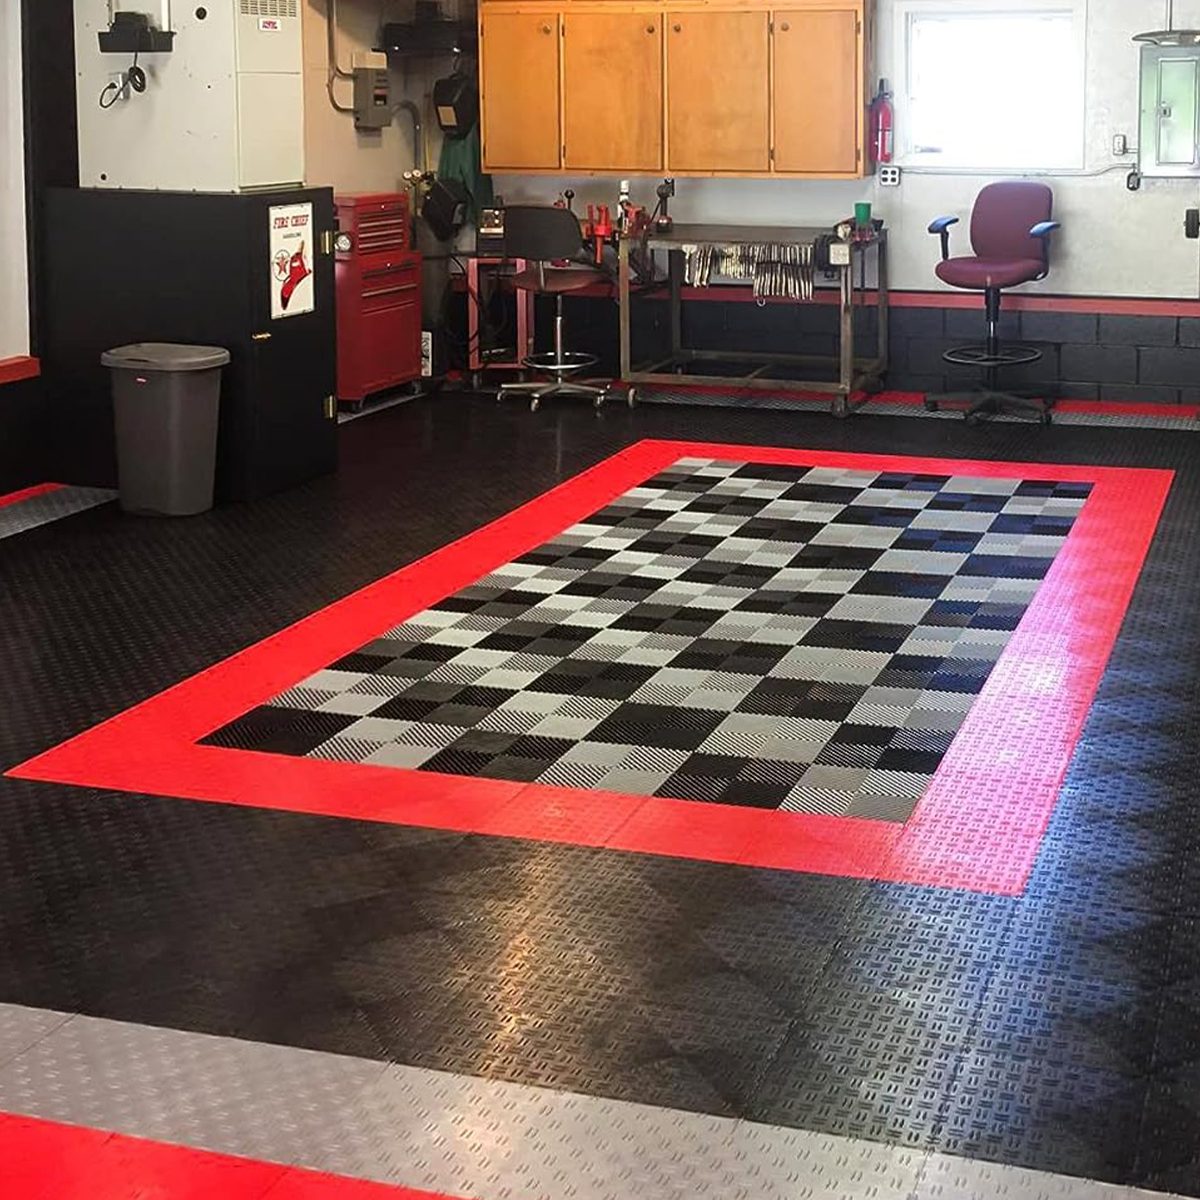 10 Affordable Garage Flooring Ideas for an Easy Upgrade